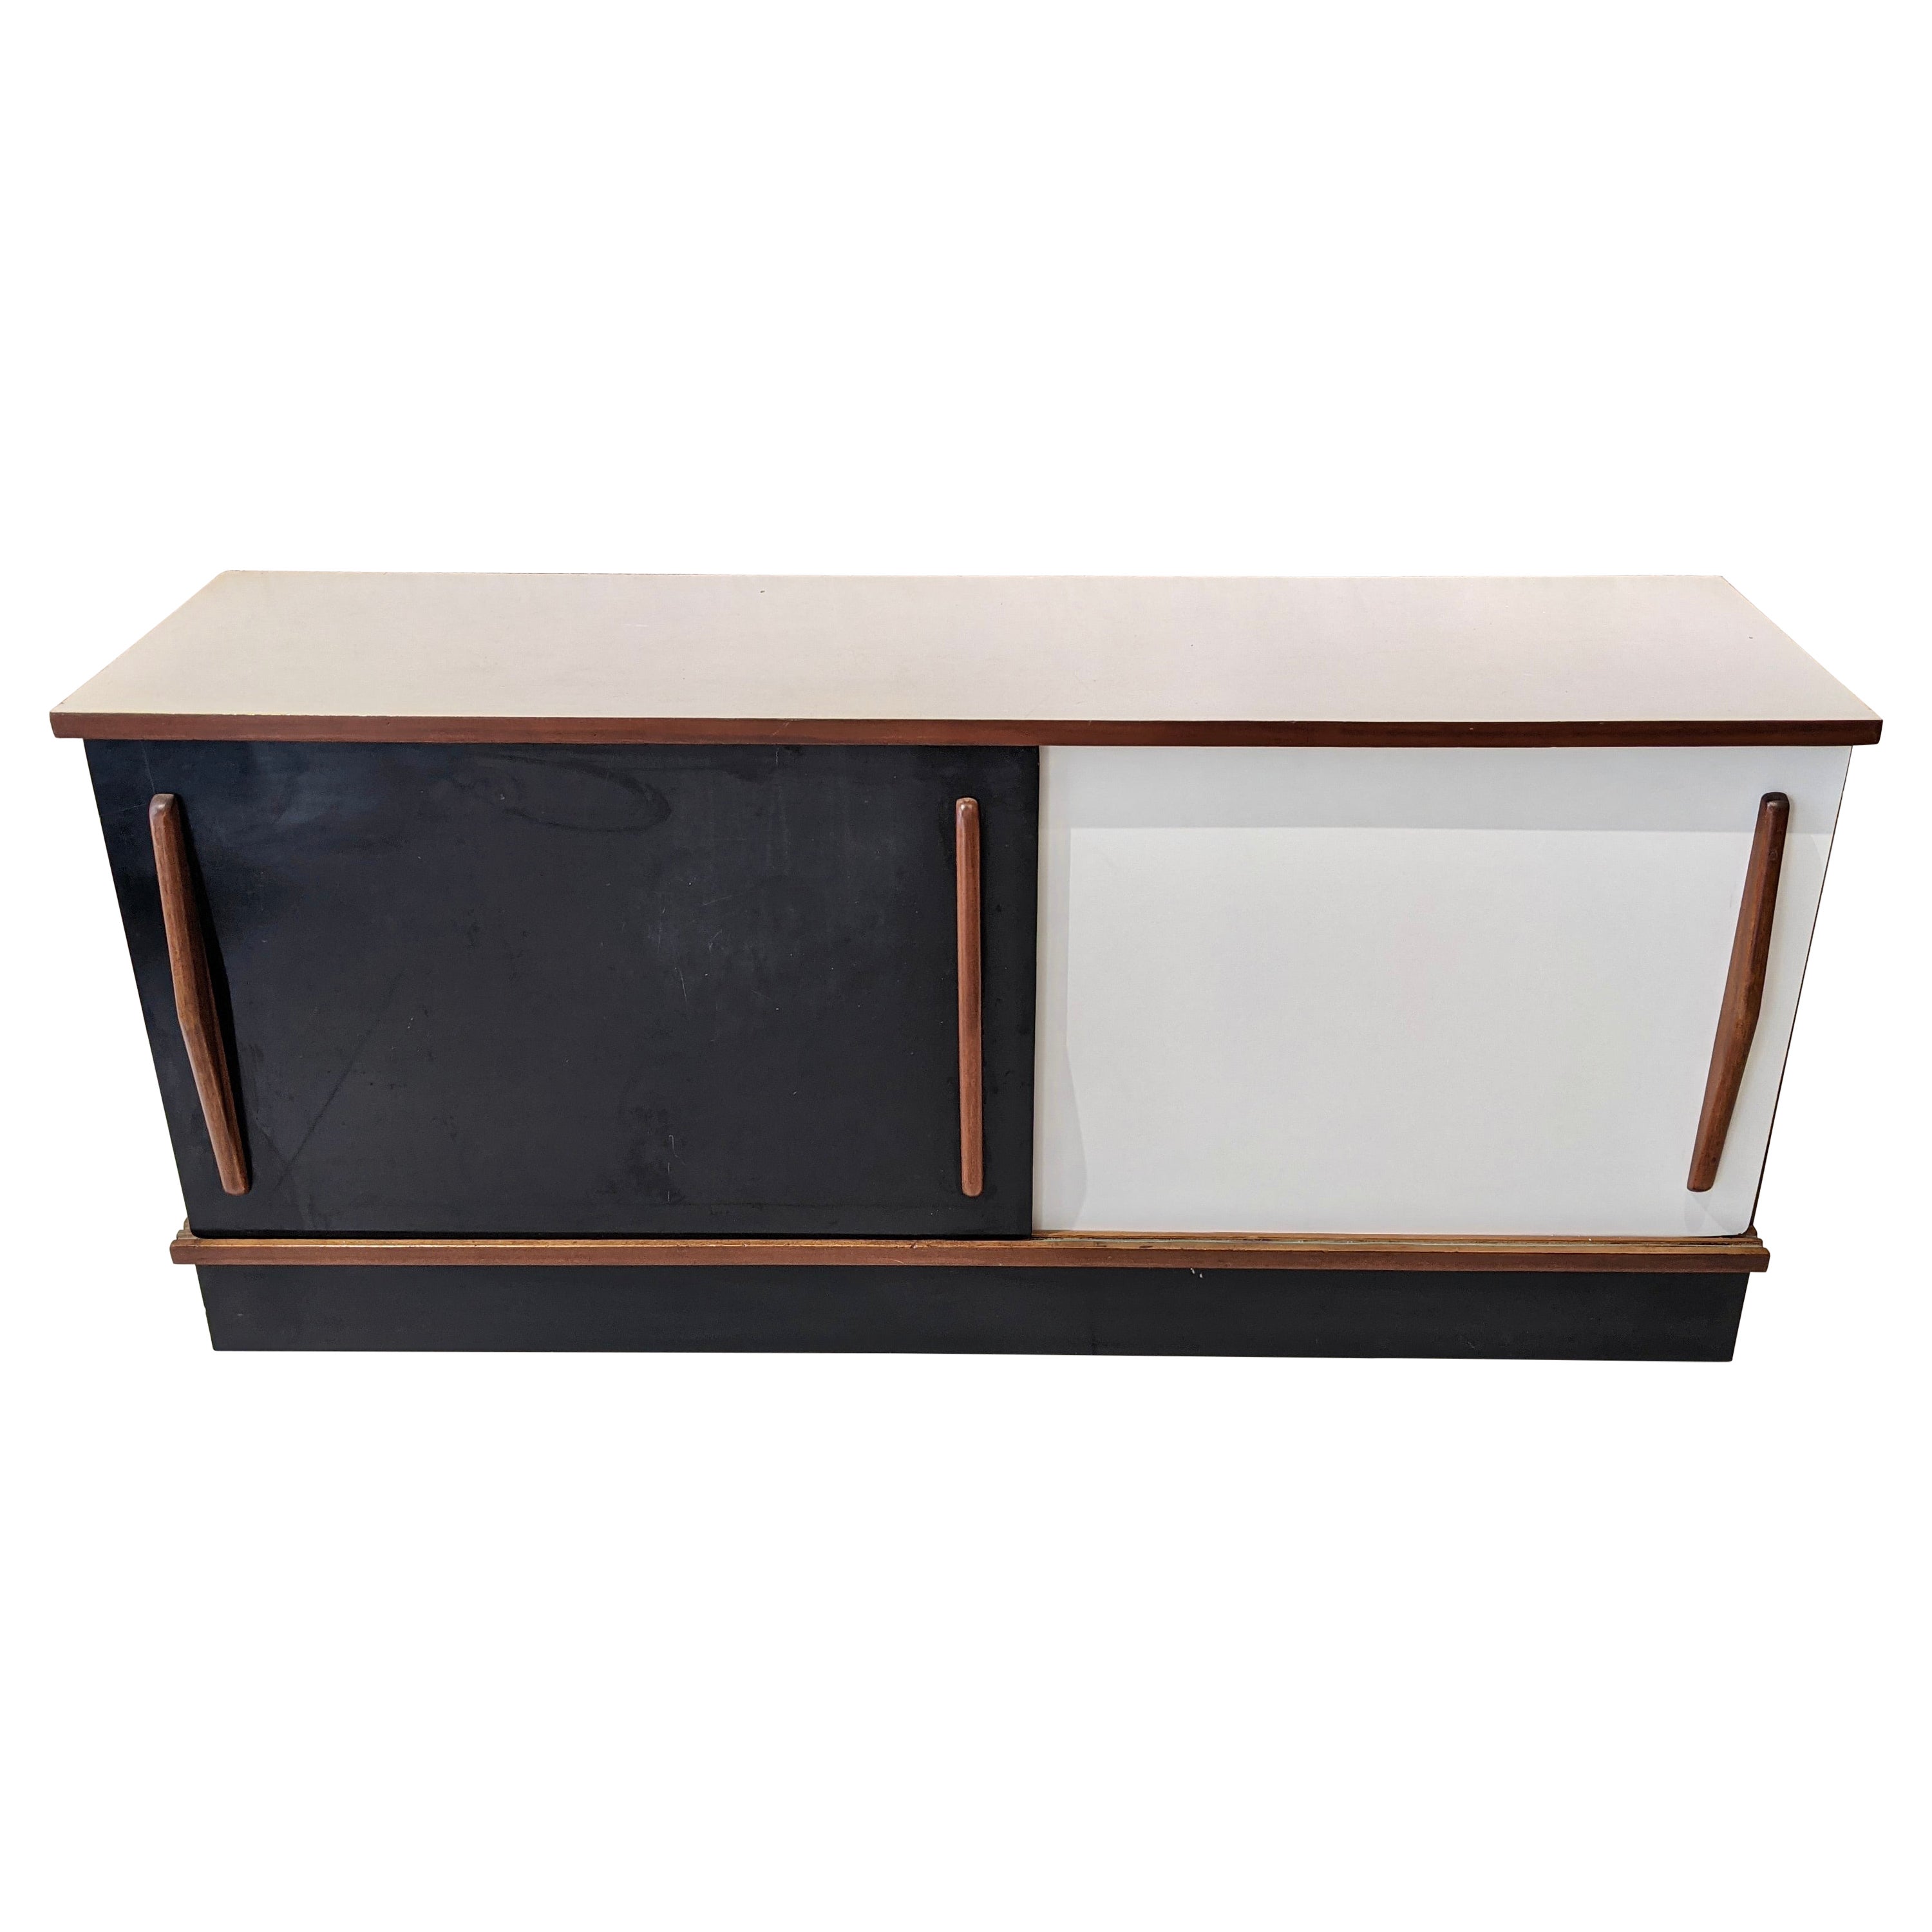 Cansado Sideboard by Charlotte Perriand